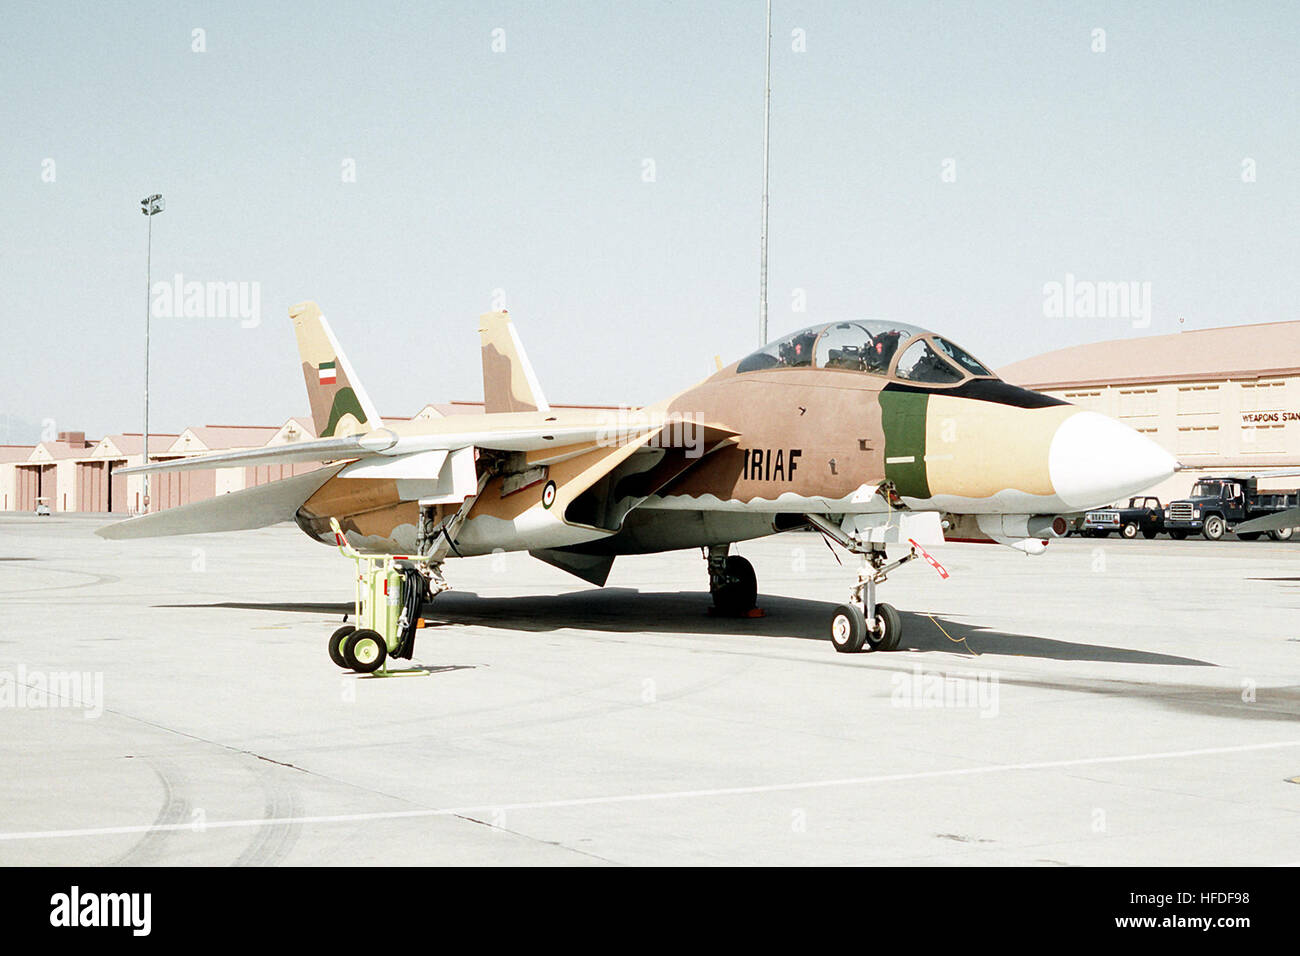 An F-14A Tomcat fighter aircraft from the U.S. Navy 'Top Gun' Fighter Weapons School, San Diego, painted like an Iranian fighter for adversary training, makes a visit to the U.S. Air Force Fighter Weapons School. Exact Date Shot Unknown US F-14 painted like an Iranian fighter Stock Photo